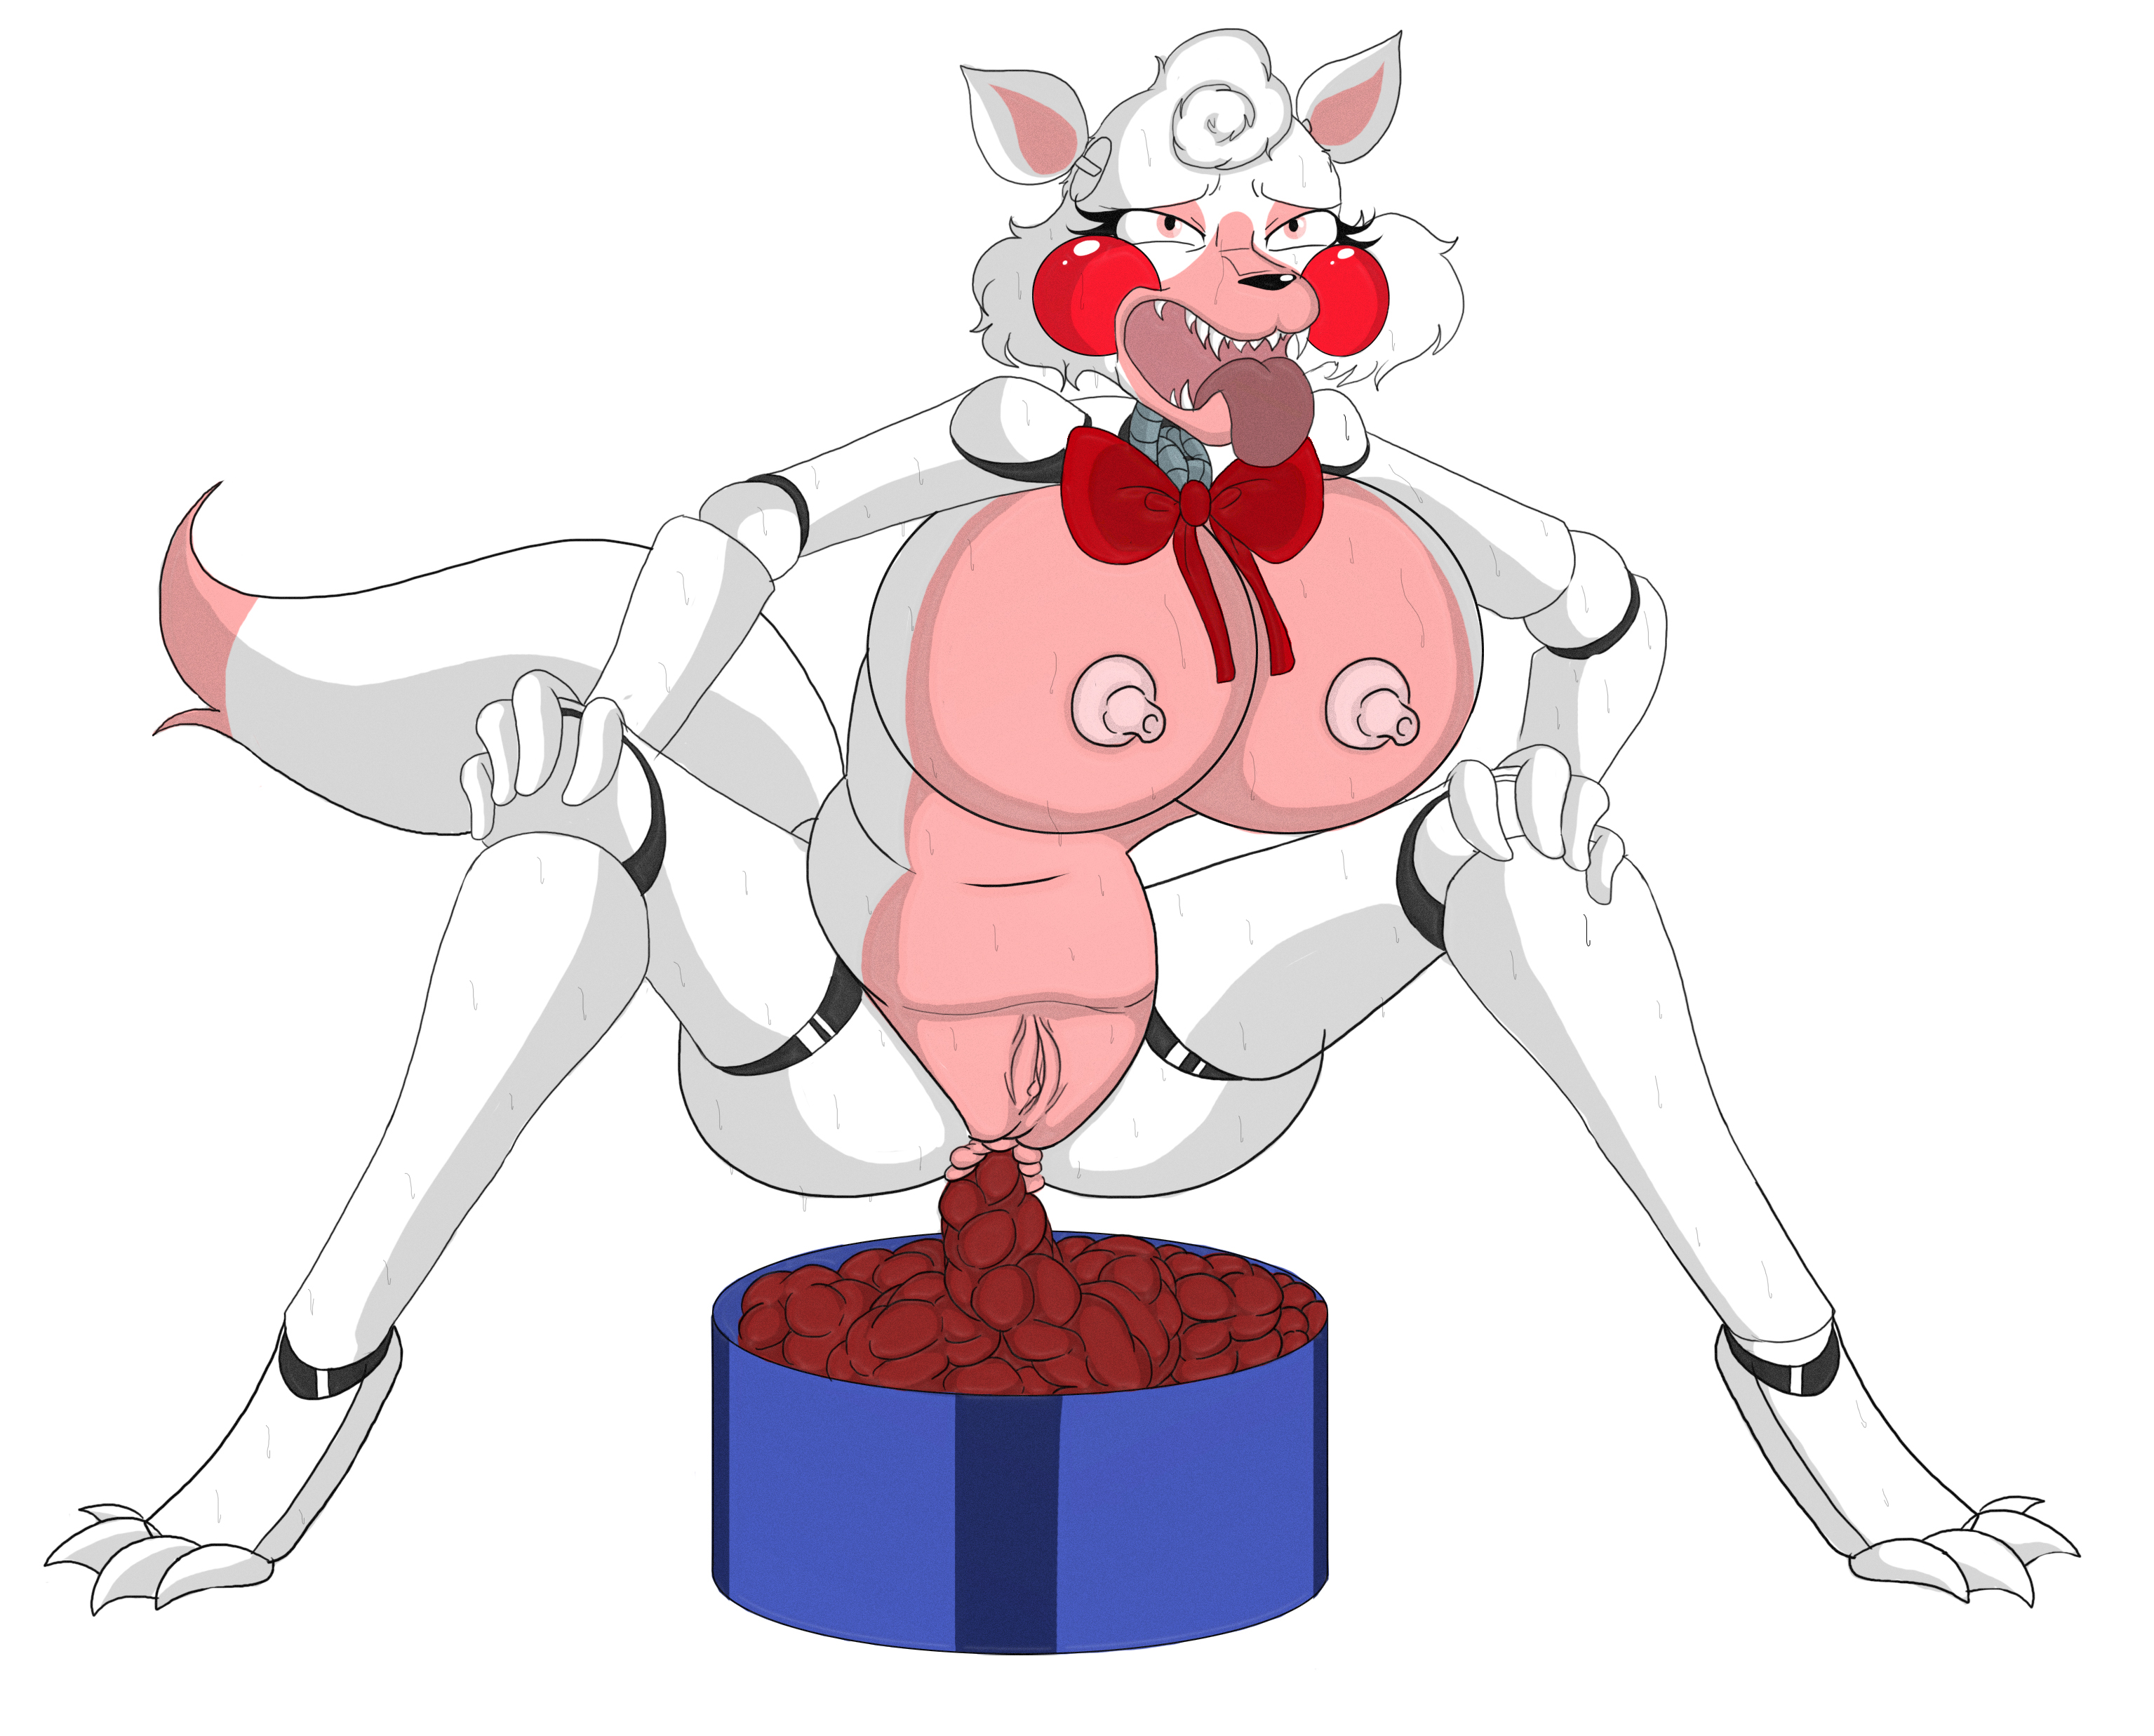 Image 1662217 Five Nights At Freddy S 2 Mangle